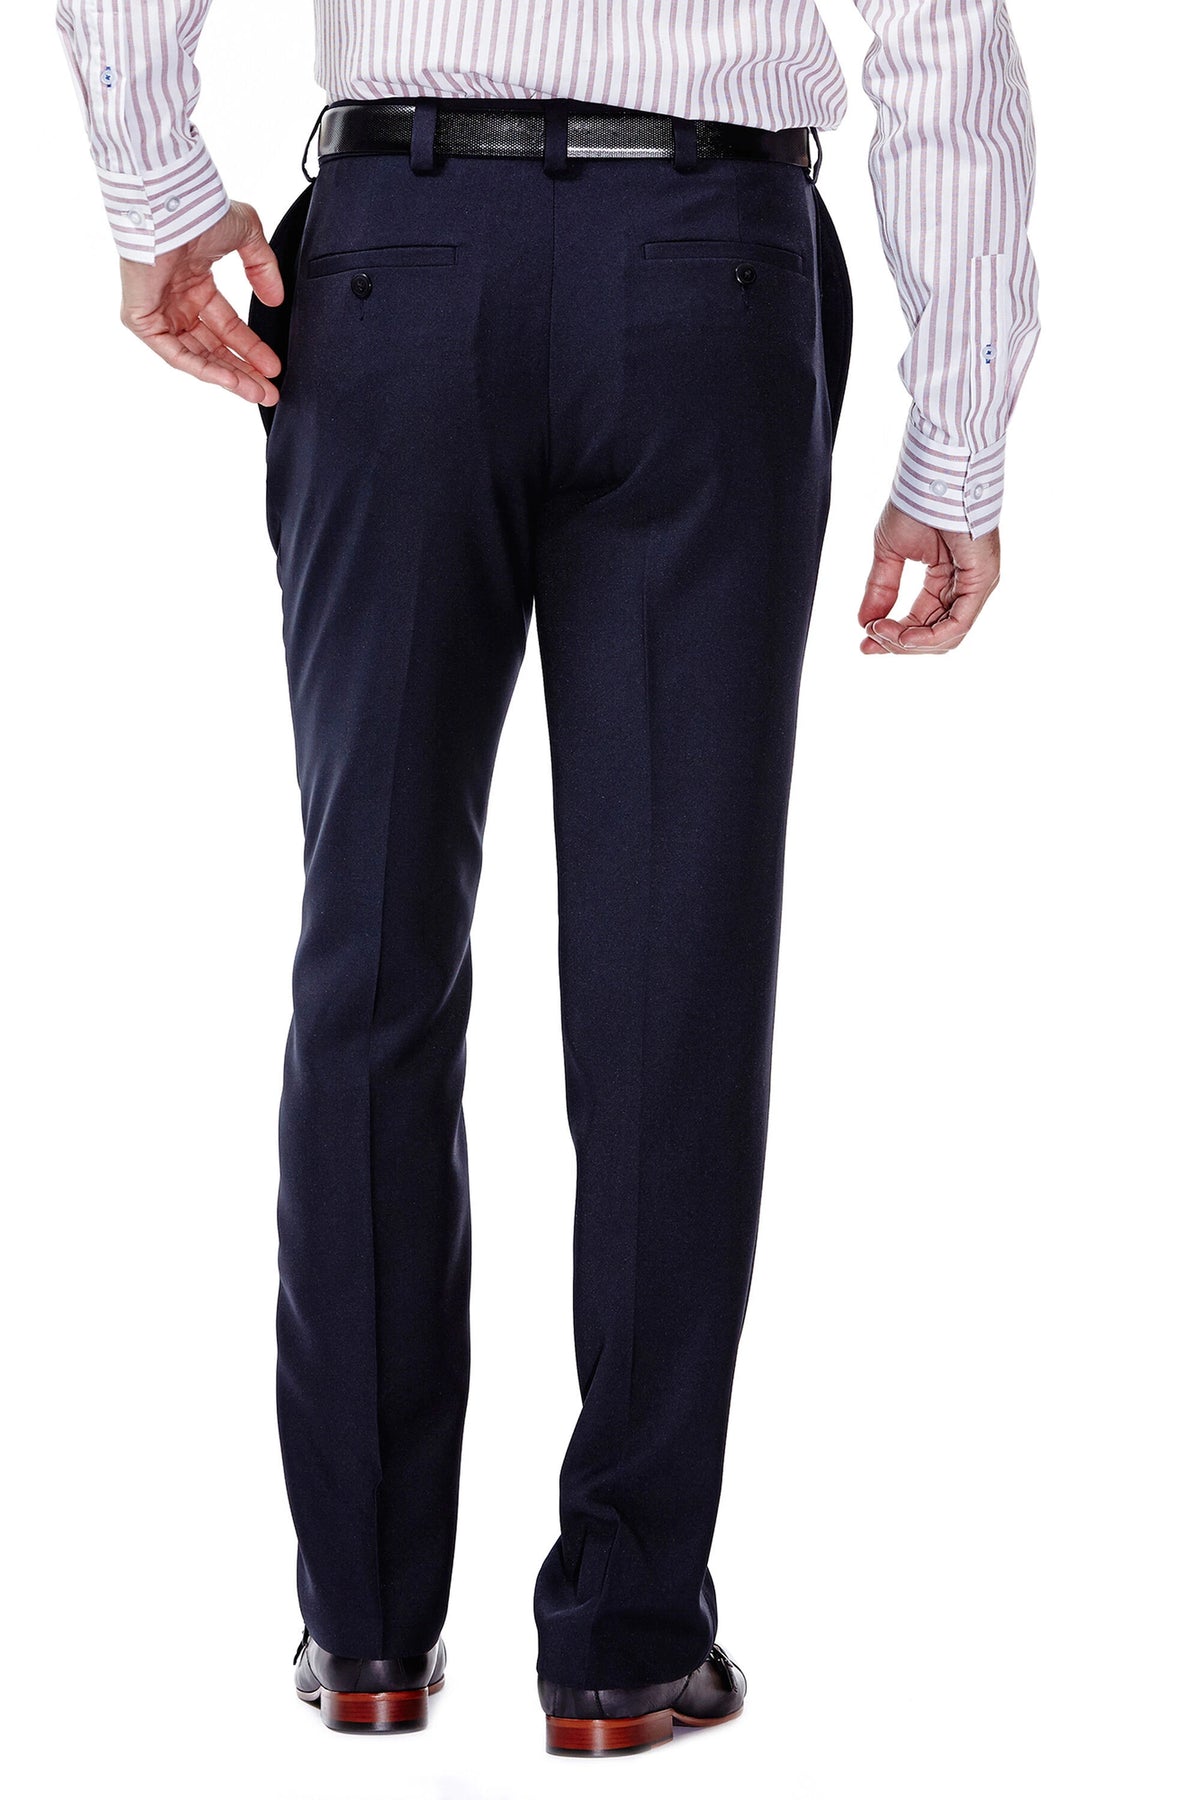 Costco Deal | Men's Haggar Stretch Chino Pants, $17.99 :: Southern Savers